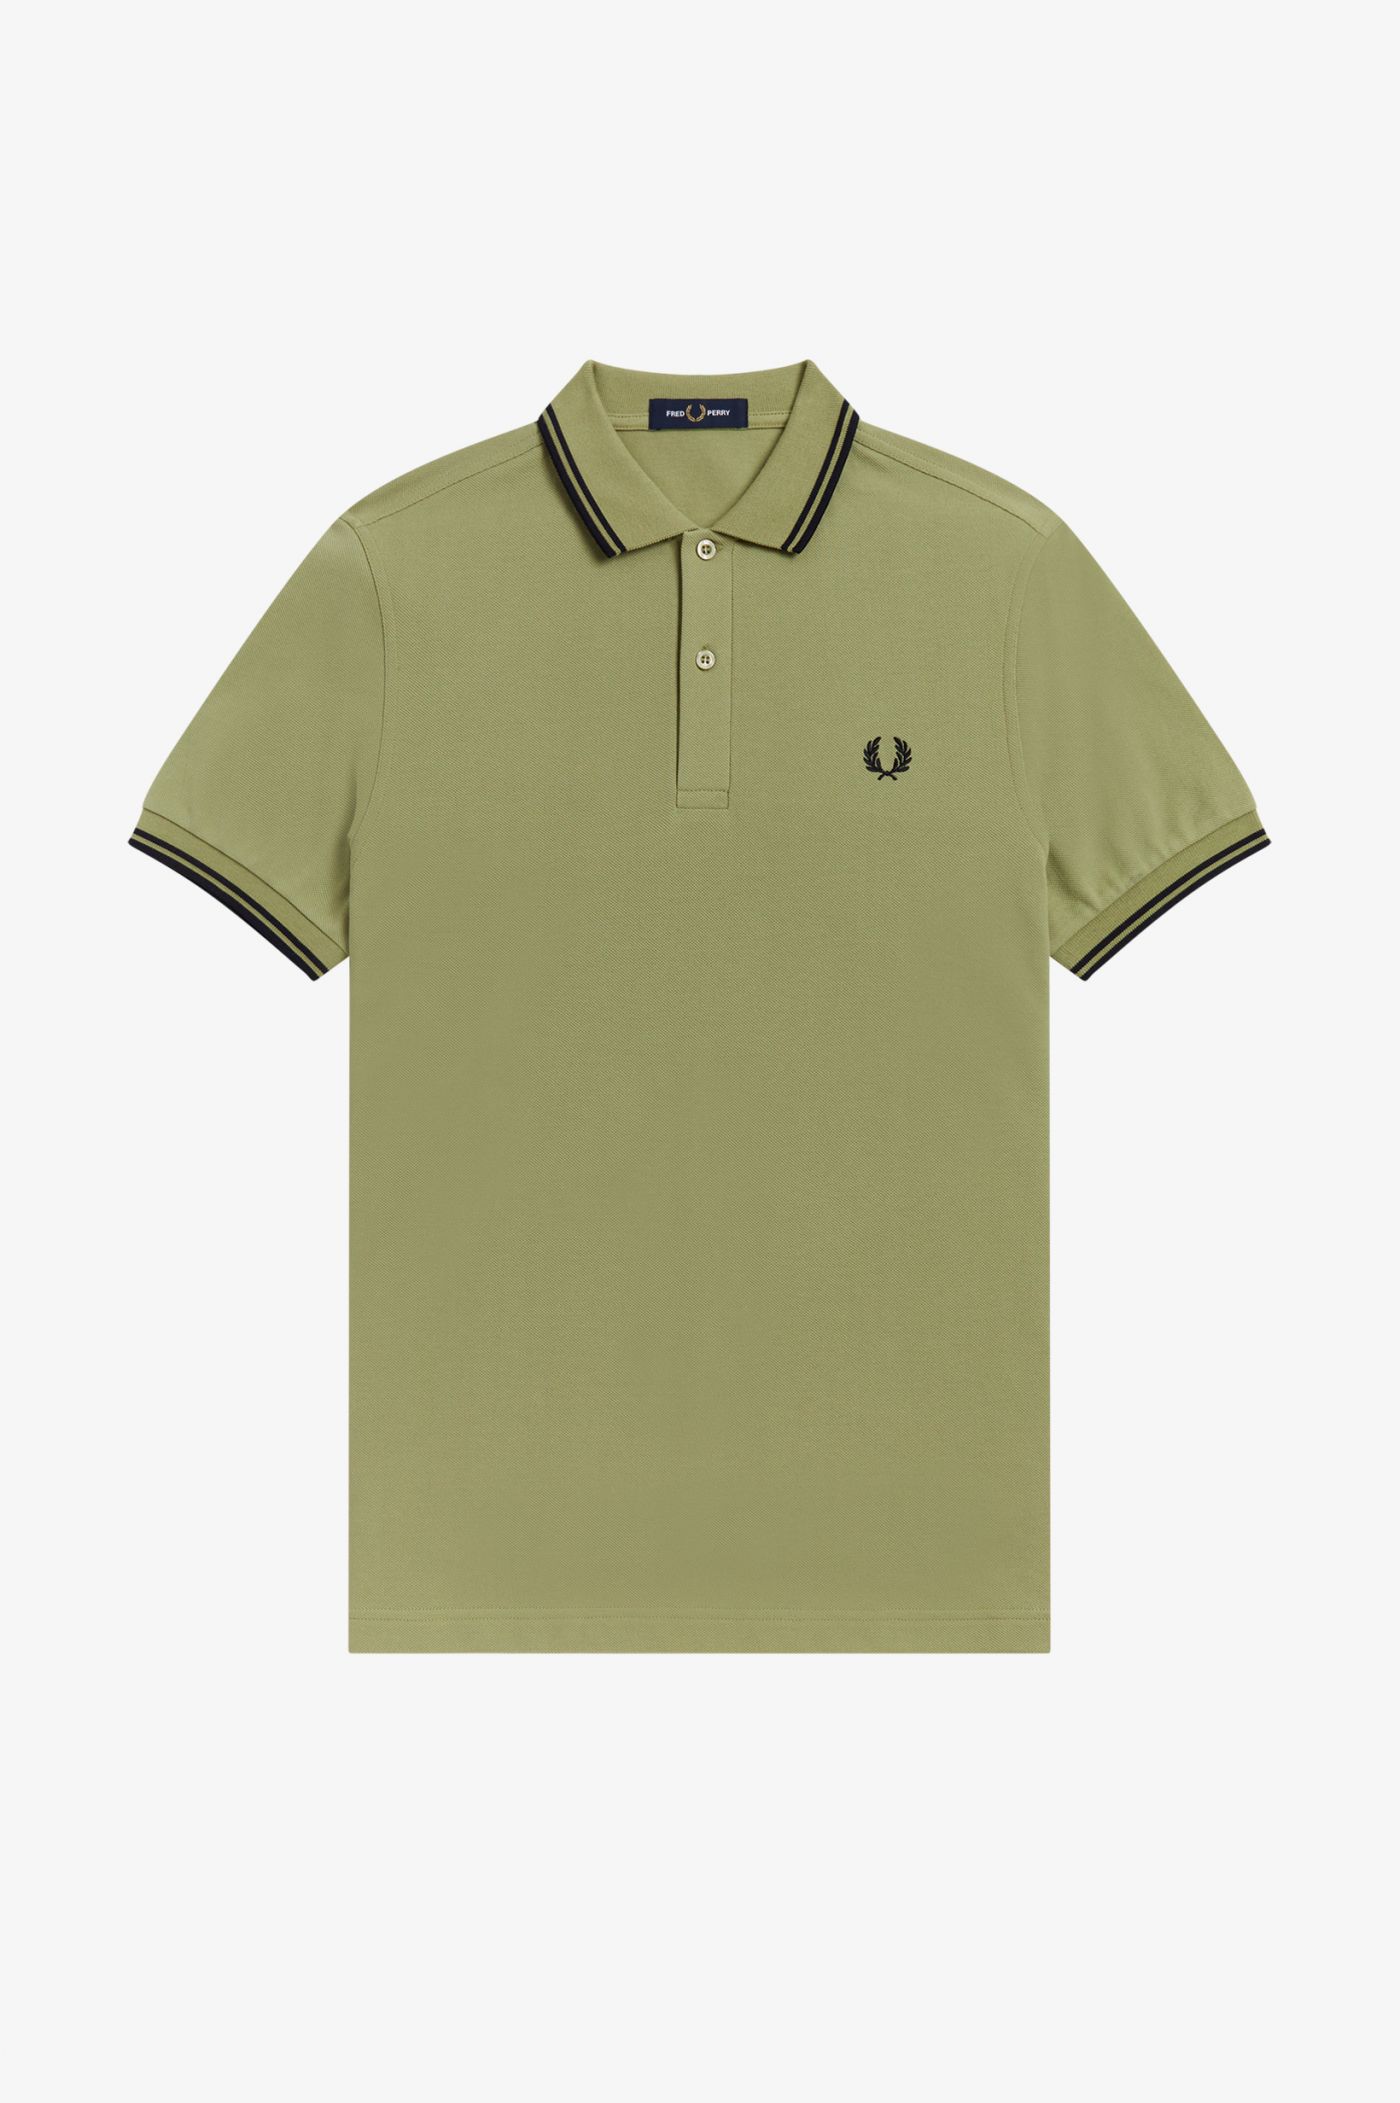 M3600 - Sage Green / Navy / Navy | The Fred Perry Shirt | Men's Short ...